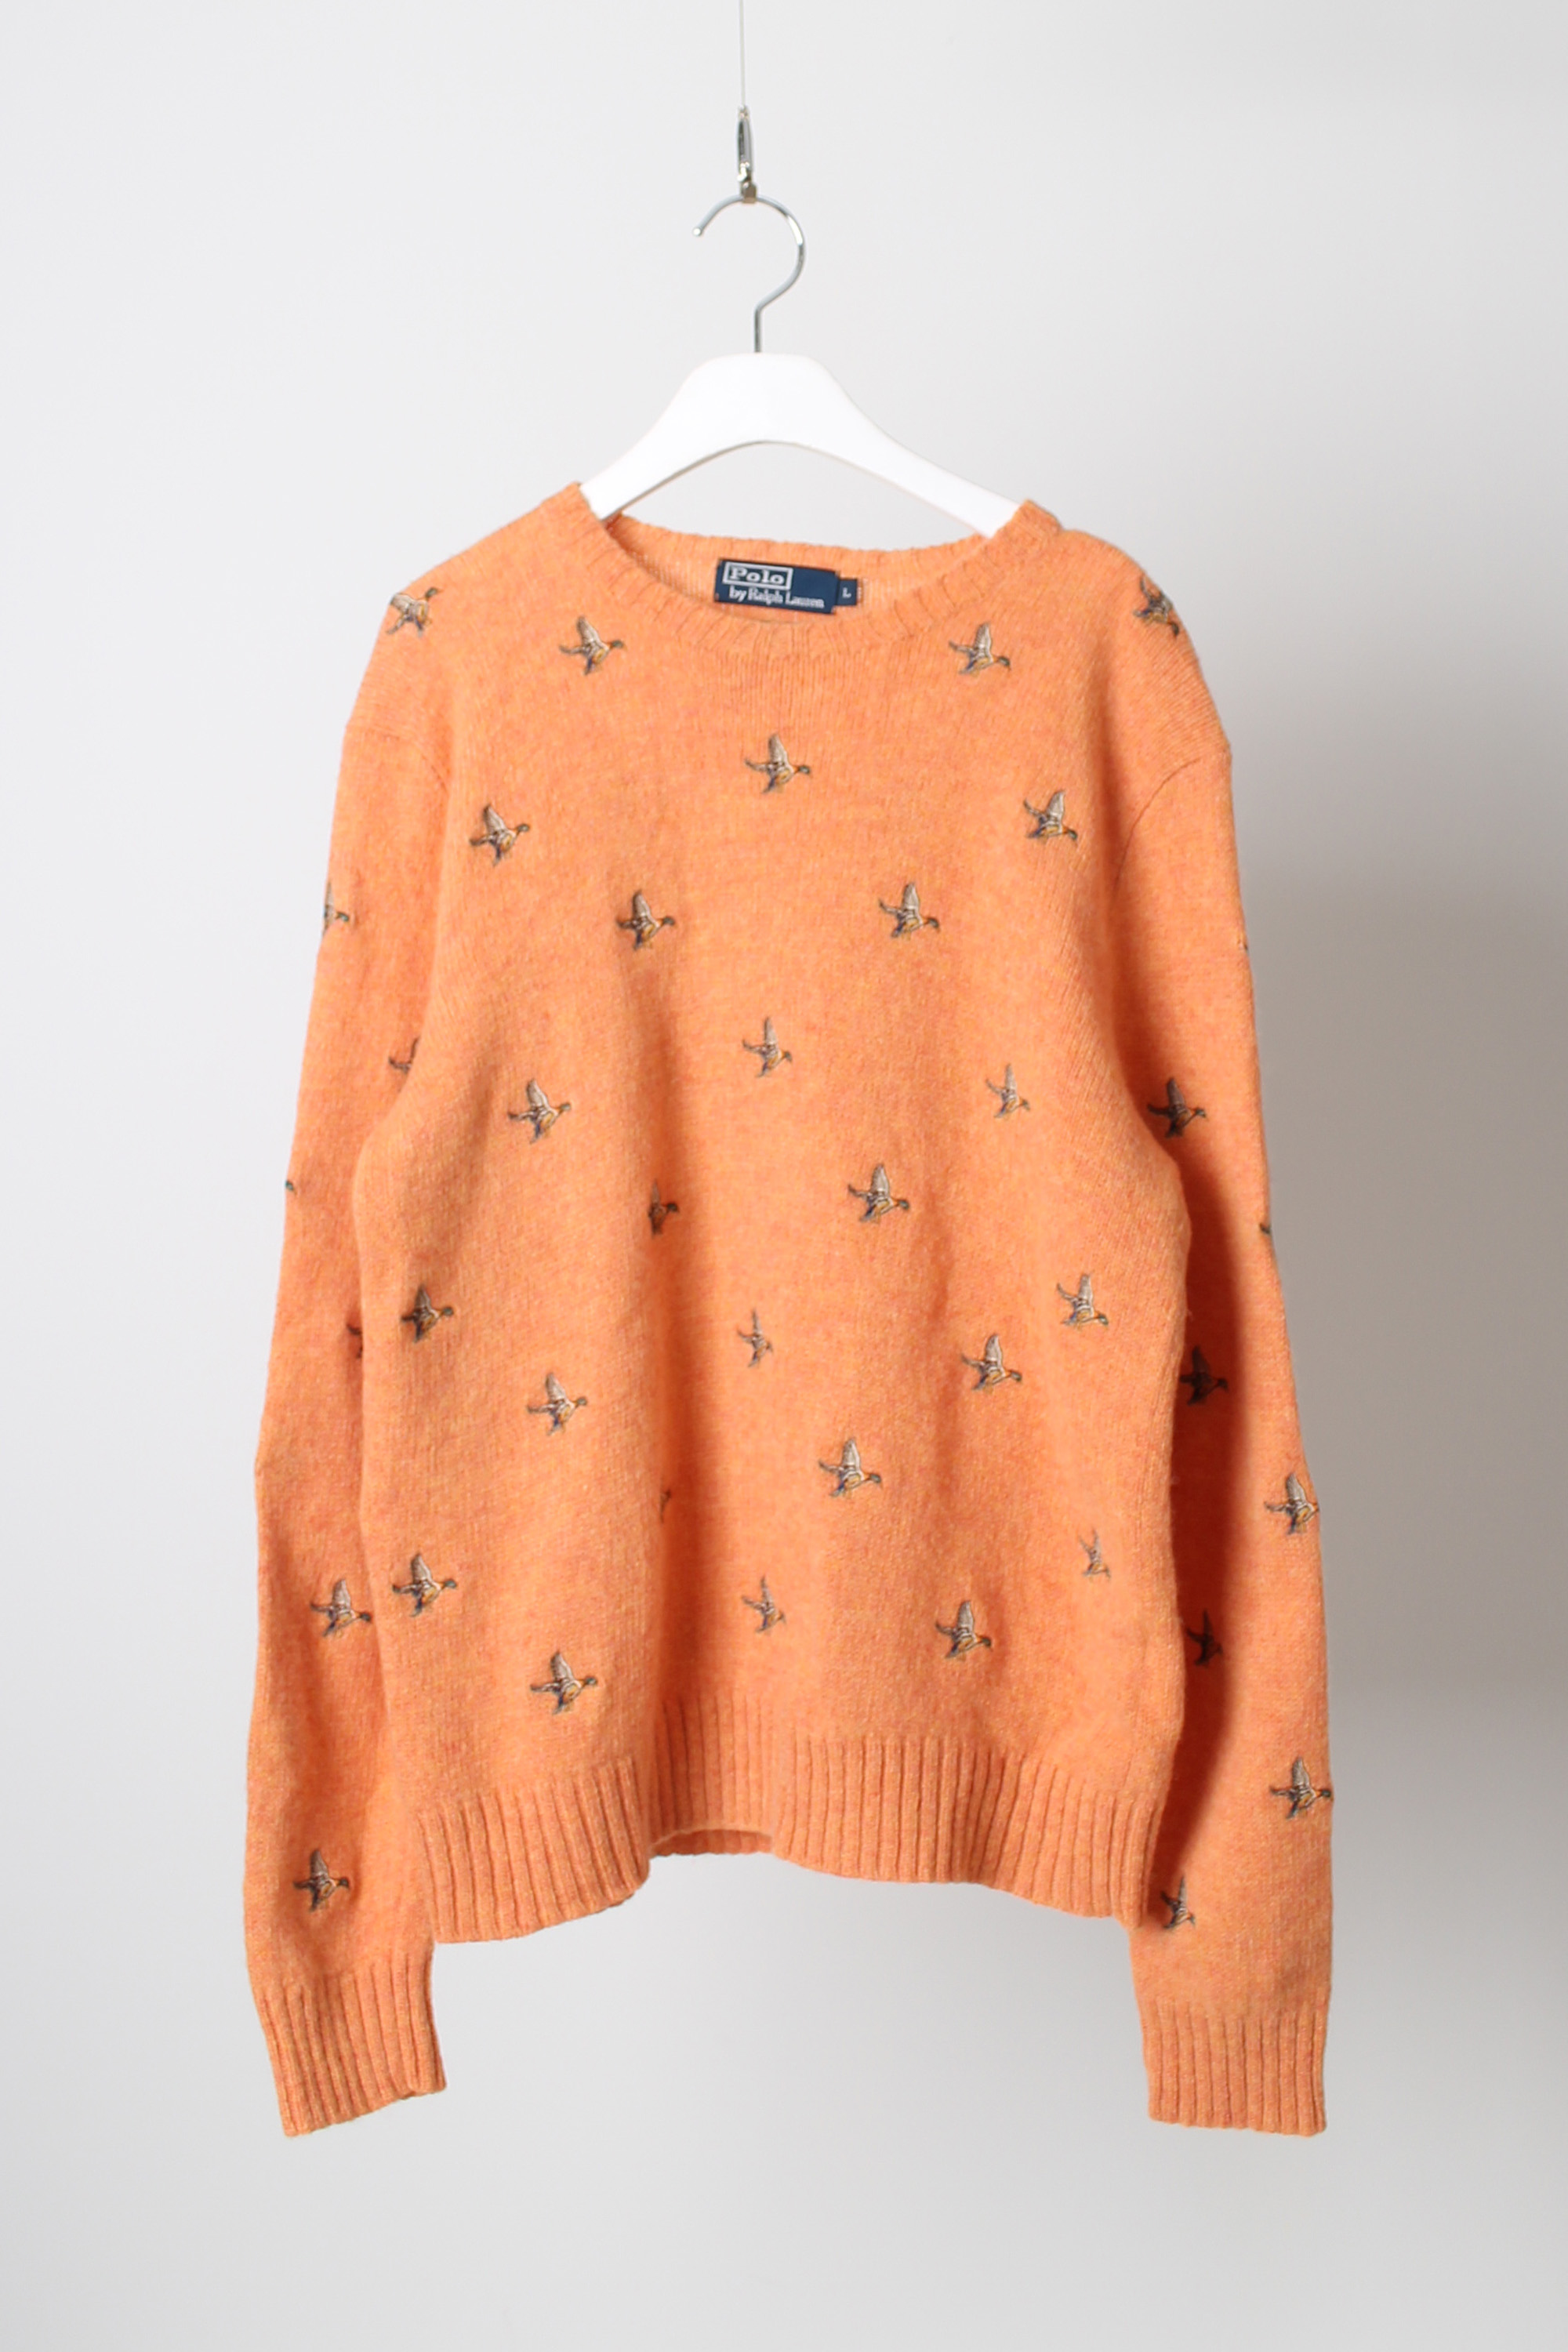 Polo Ralph Lauren embroidery knit